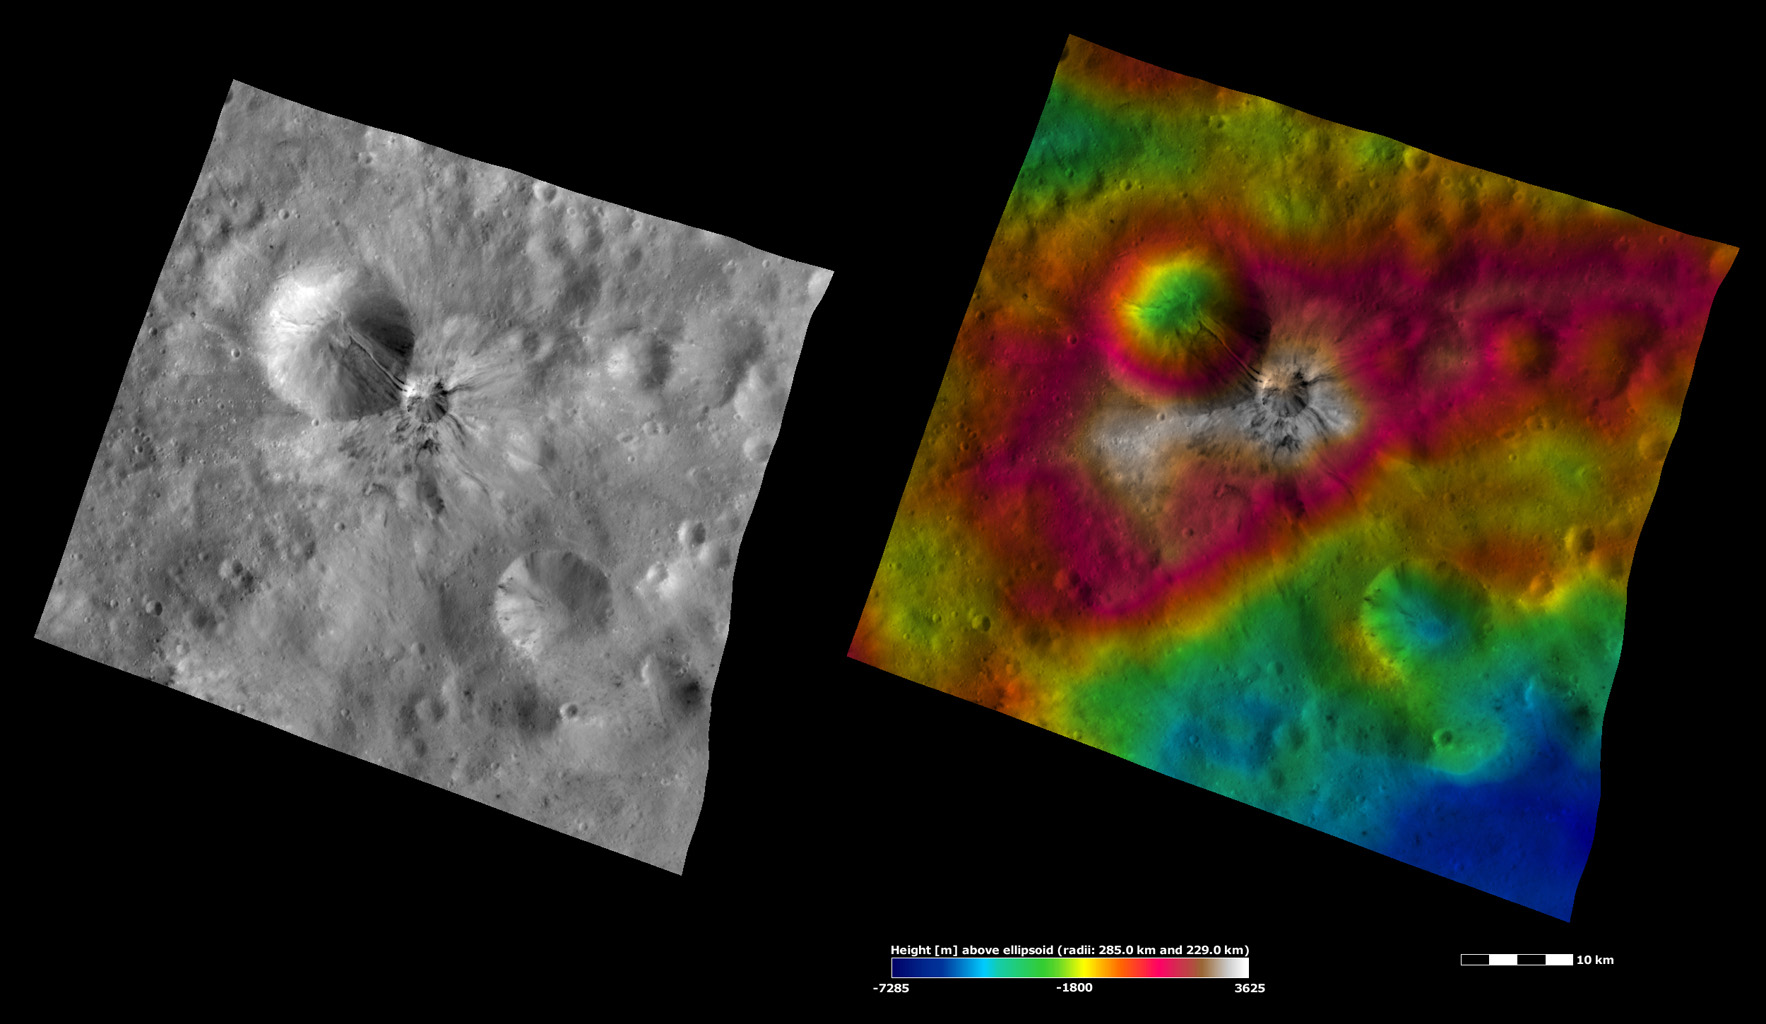 Apparent Brightness and Topography Images of Aelia Crater